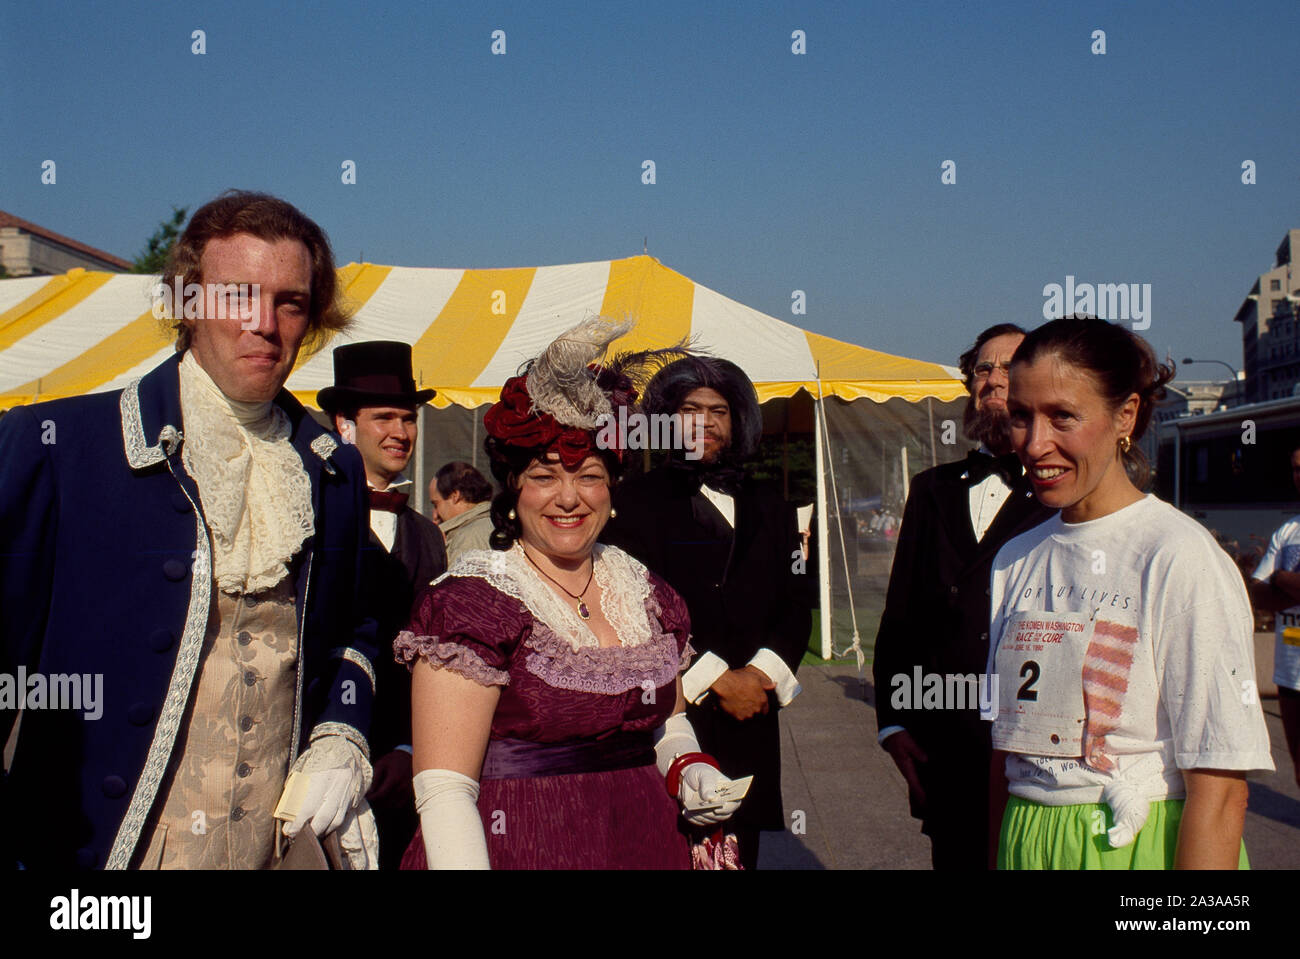 Second Lady Marilyn Quayle, right, with costumed historical interpreters at a Race for the Cure run in 1990, Washington, D.C Stock Photo